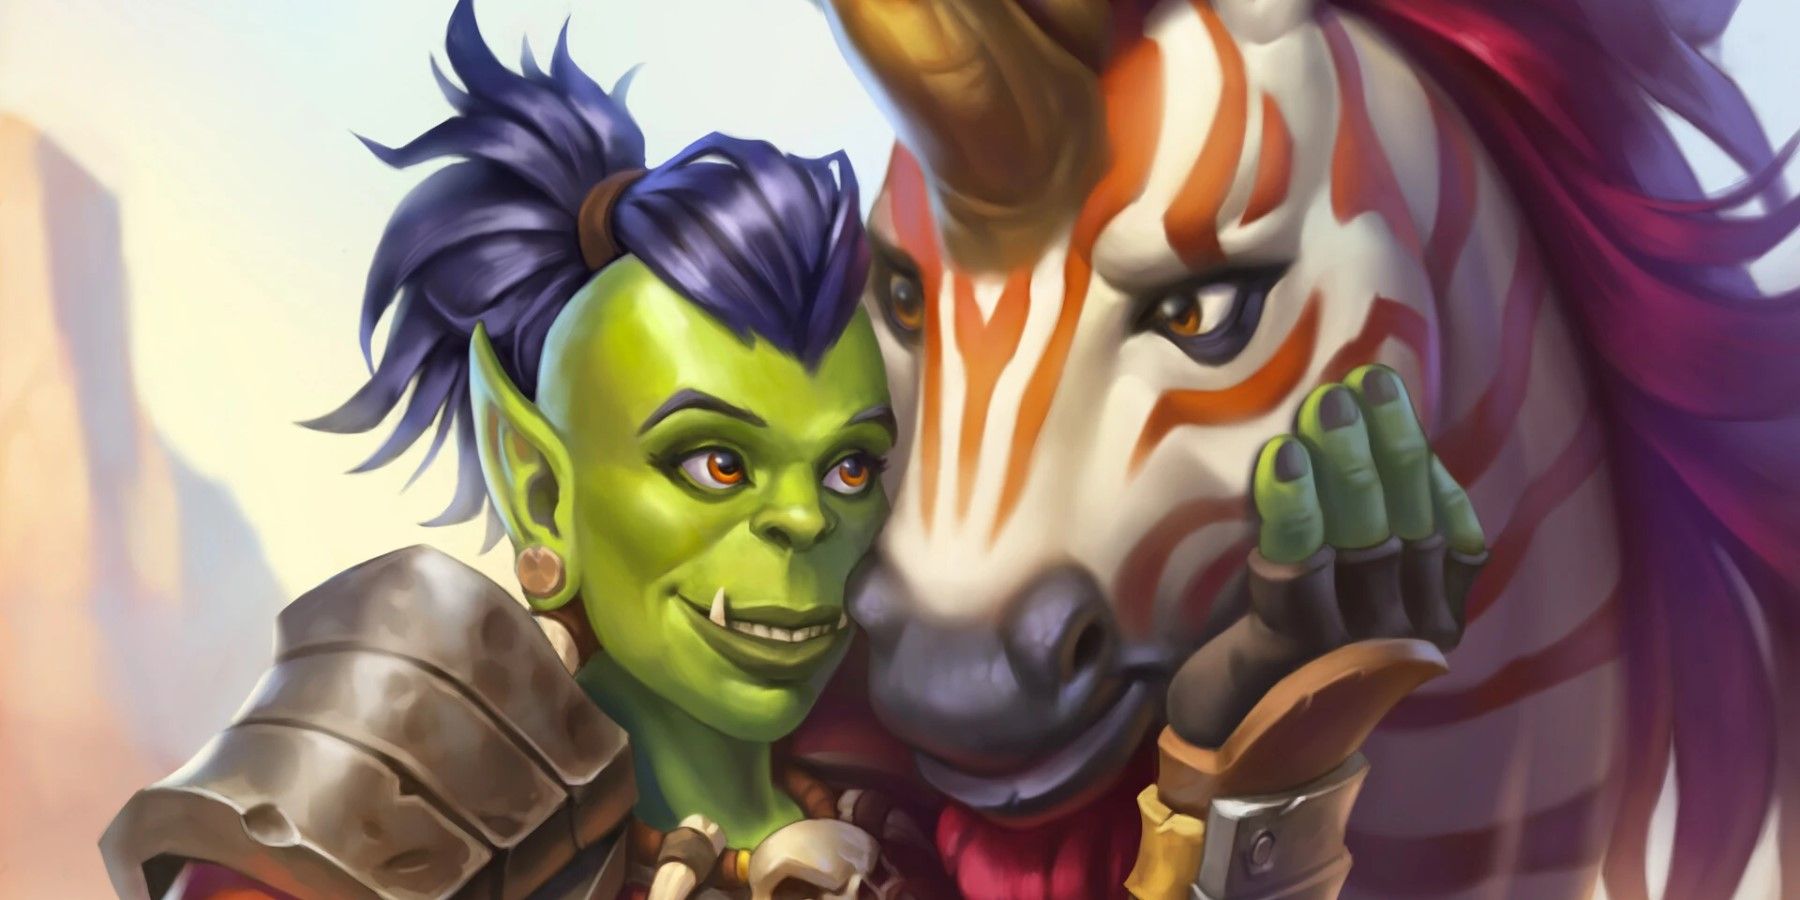 an orc and zhevra from warcraft hearthstone